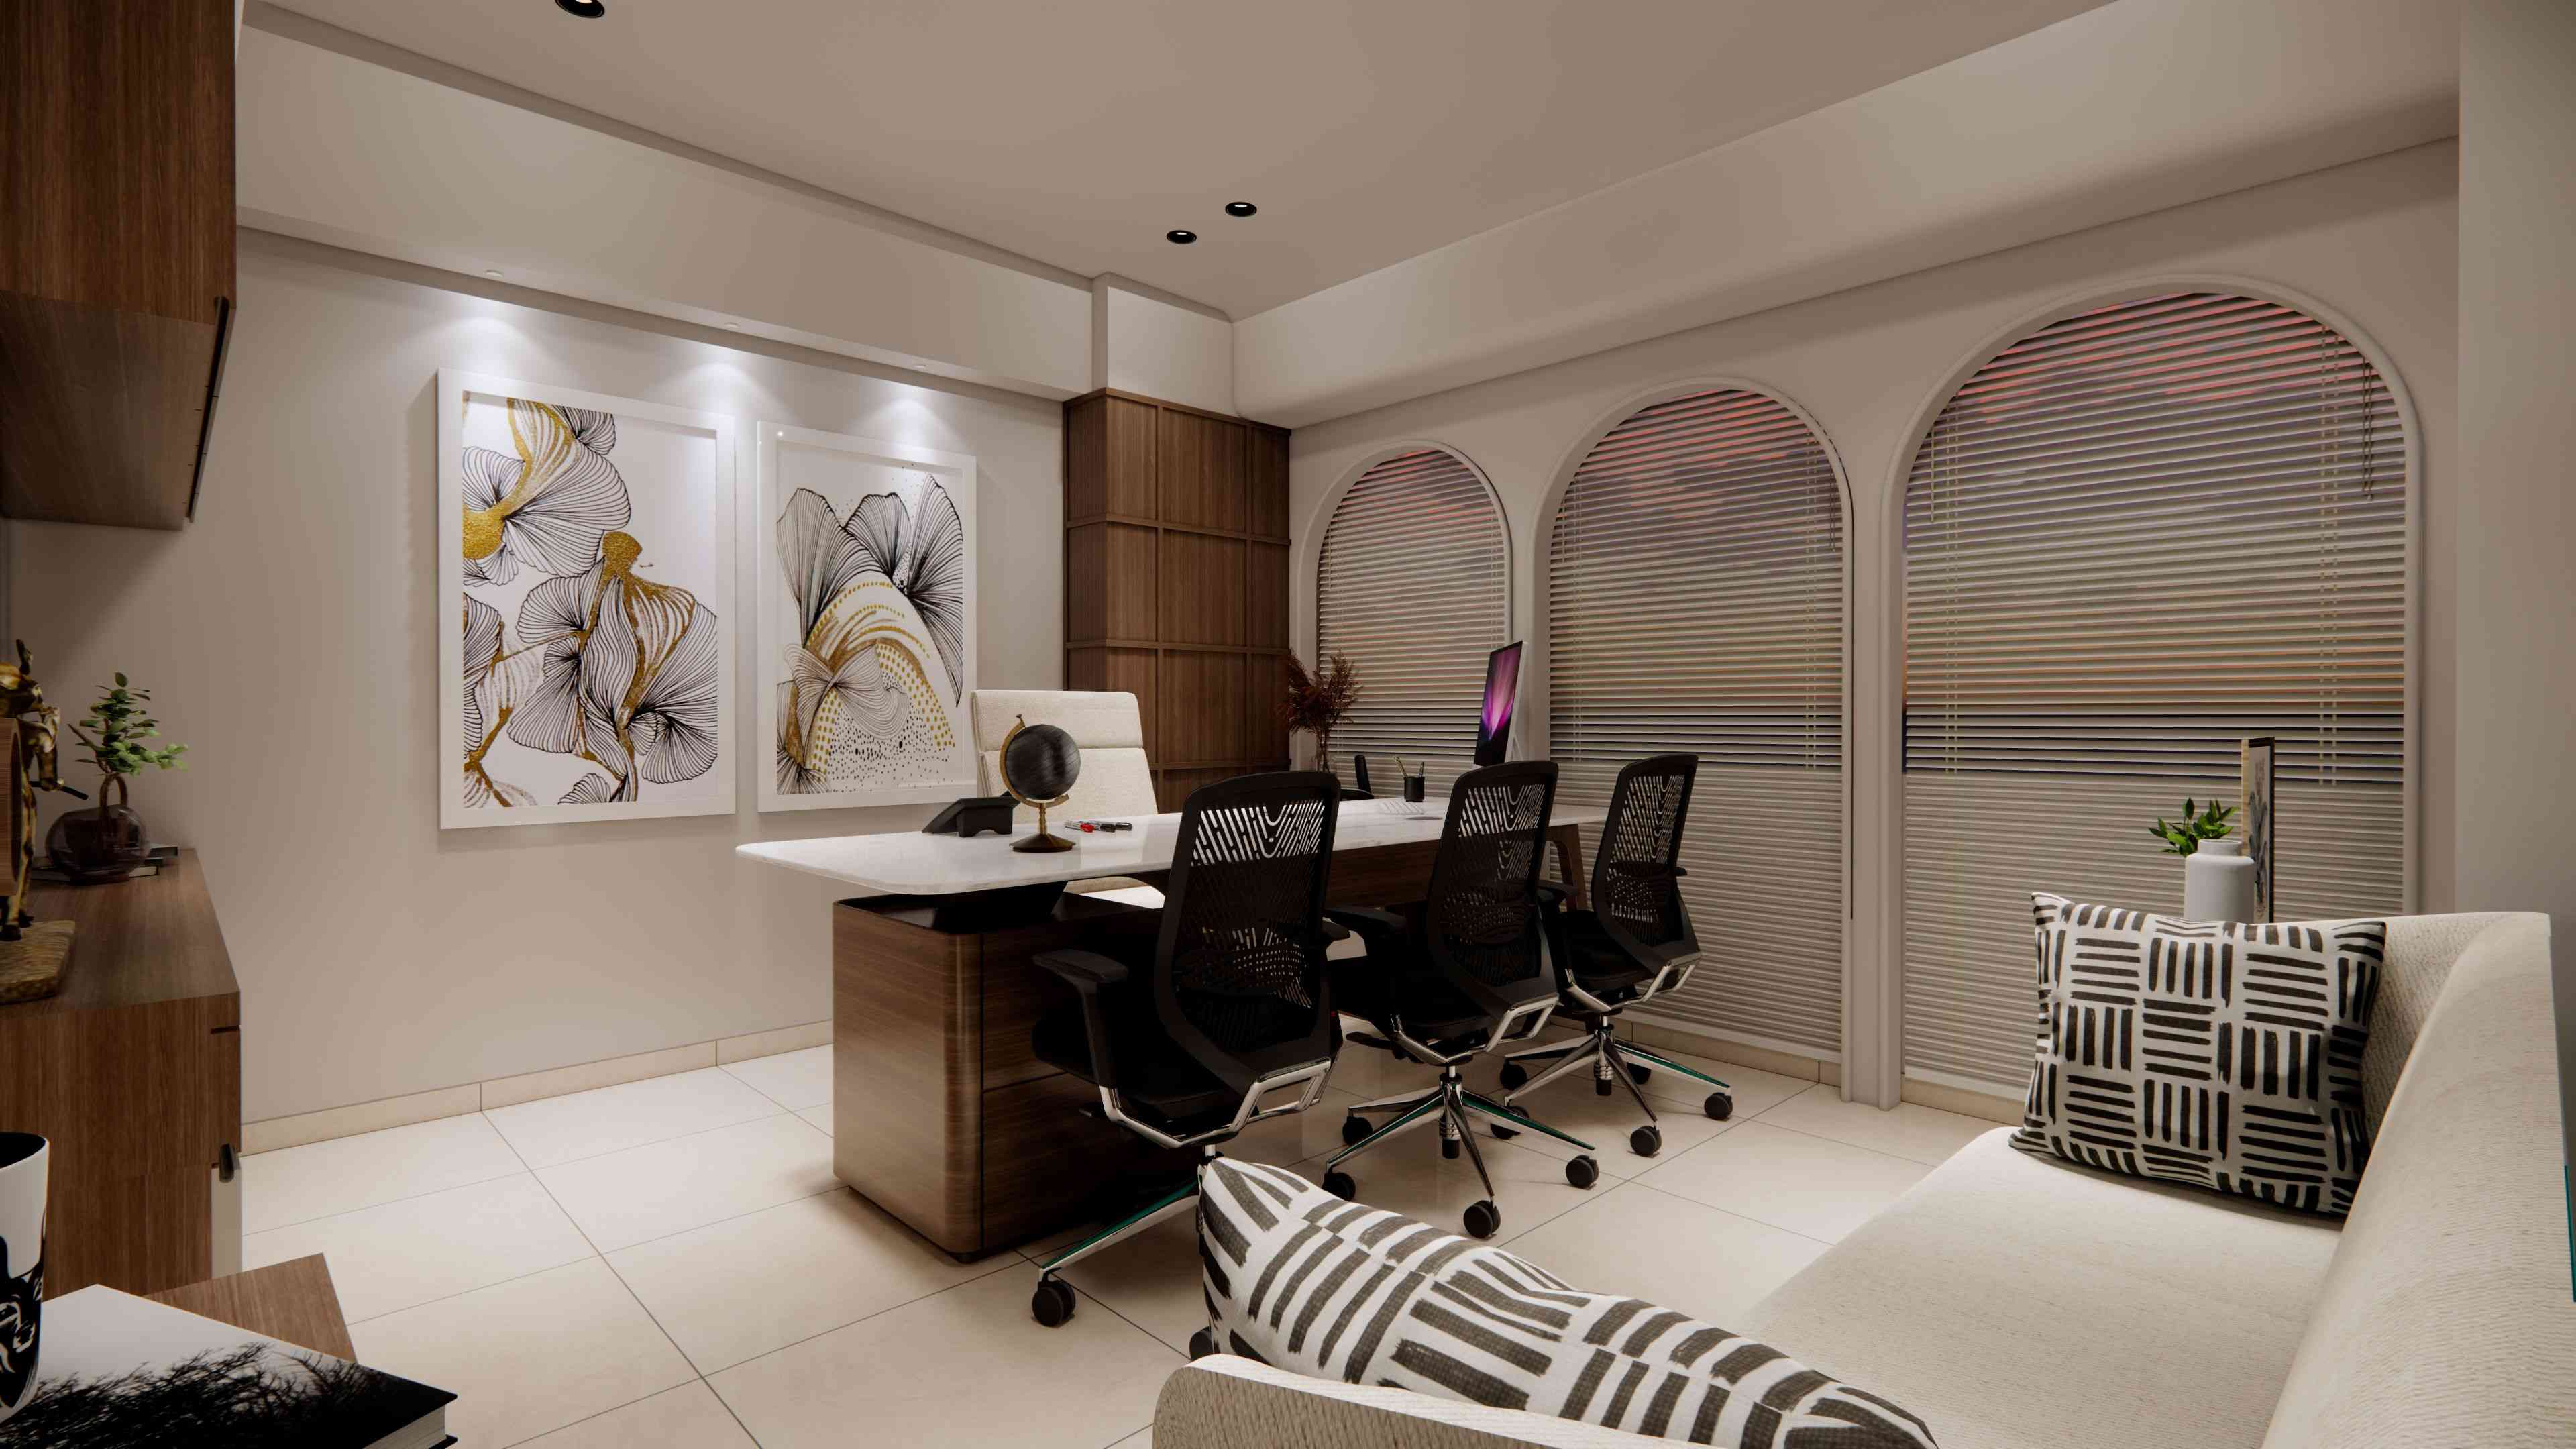 Modern Office Design With Furniture And Wall Painting